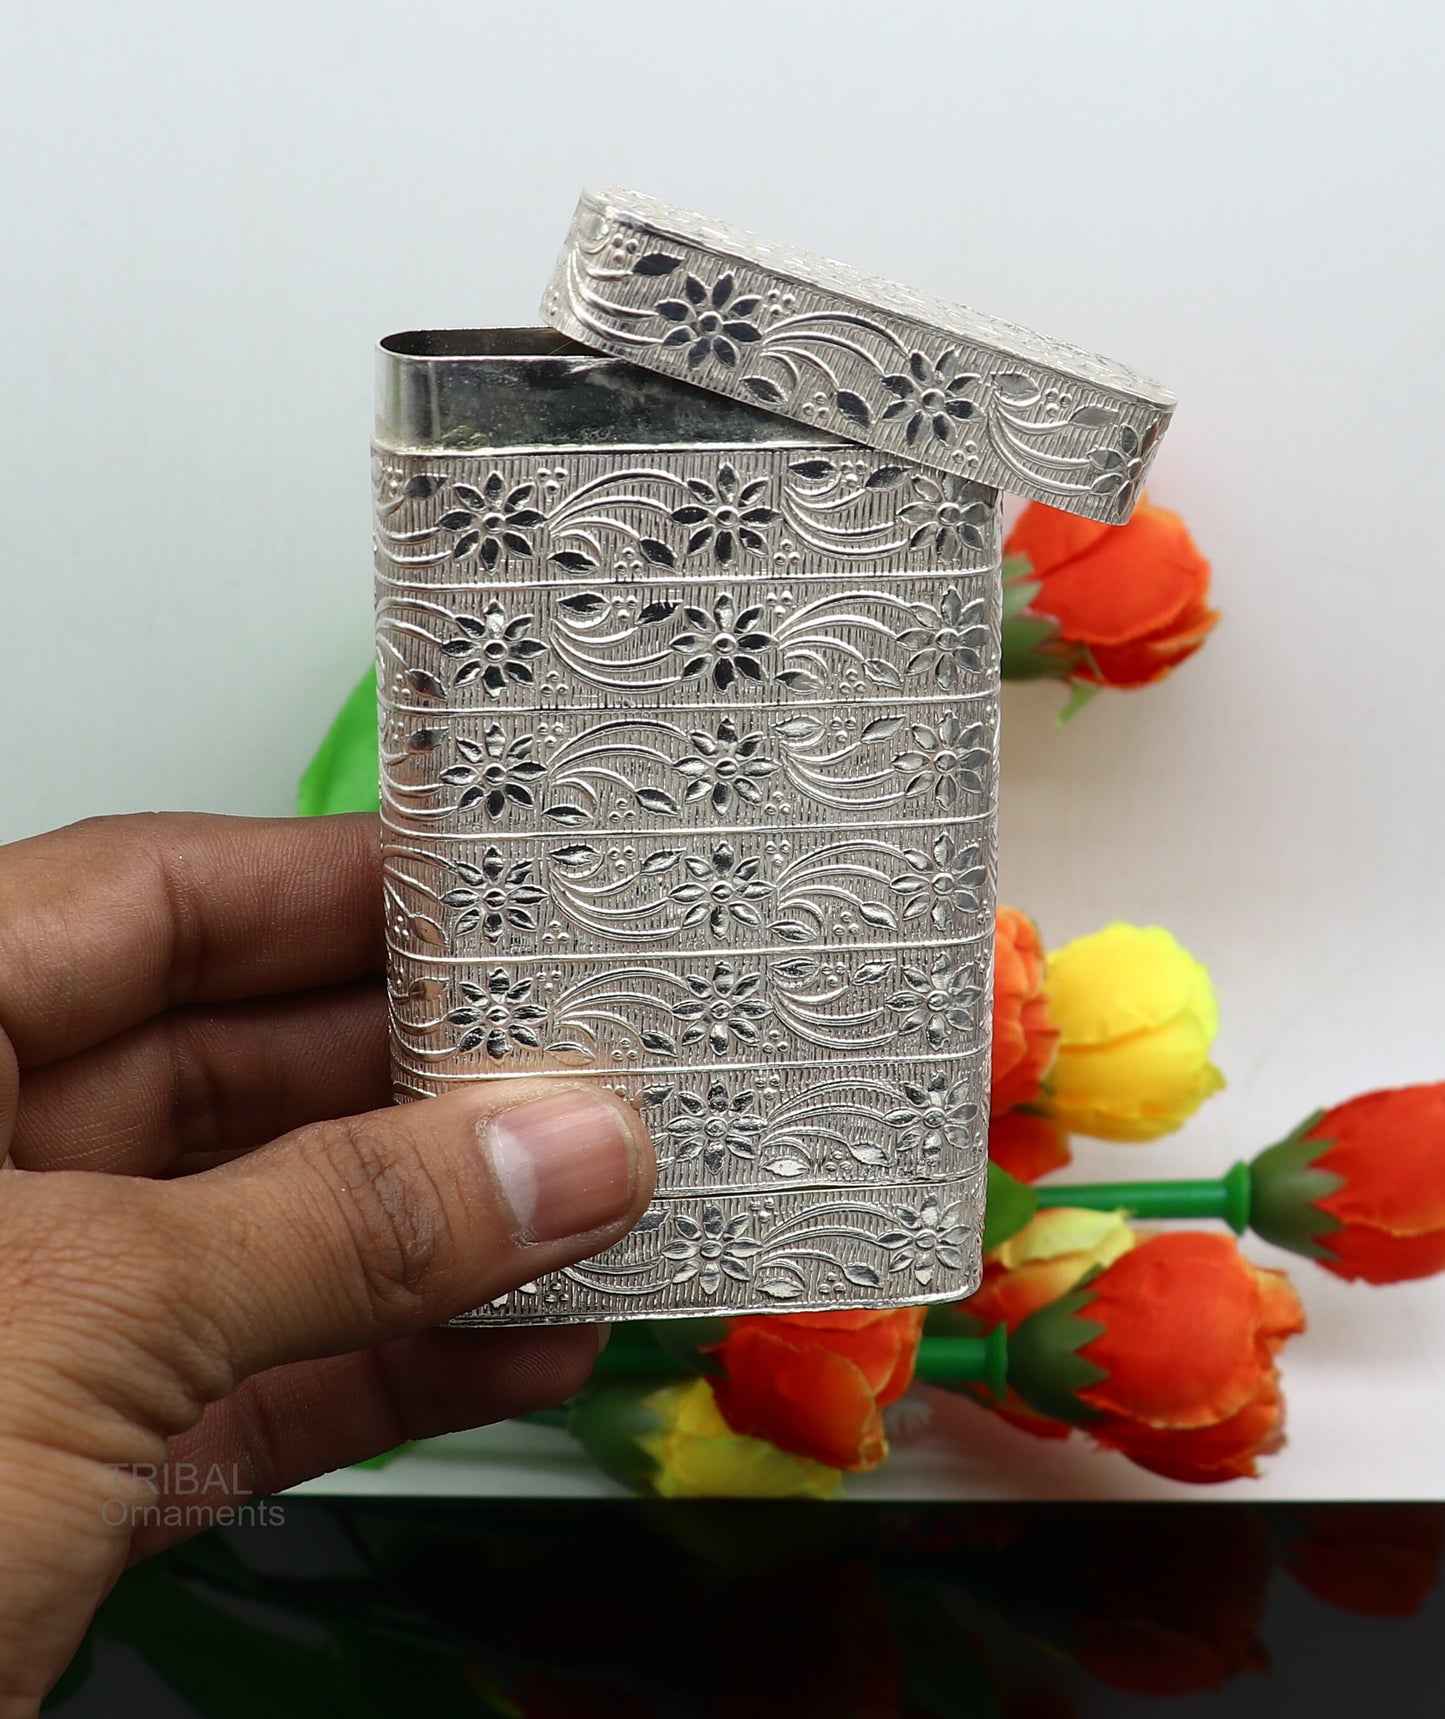 cigarette or tobacco box 925 solid silver vintage floral design stylish trinket box, best royal luxury gift to anyone special stb325 - TRIBAL ORNAMENTS